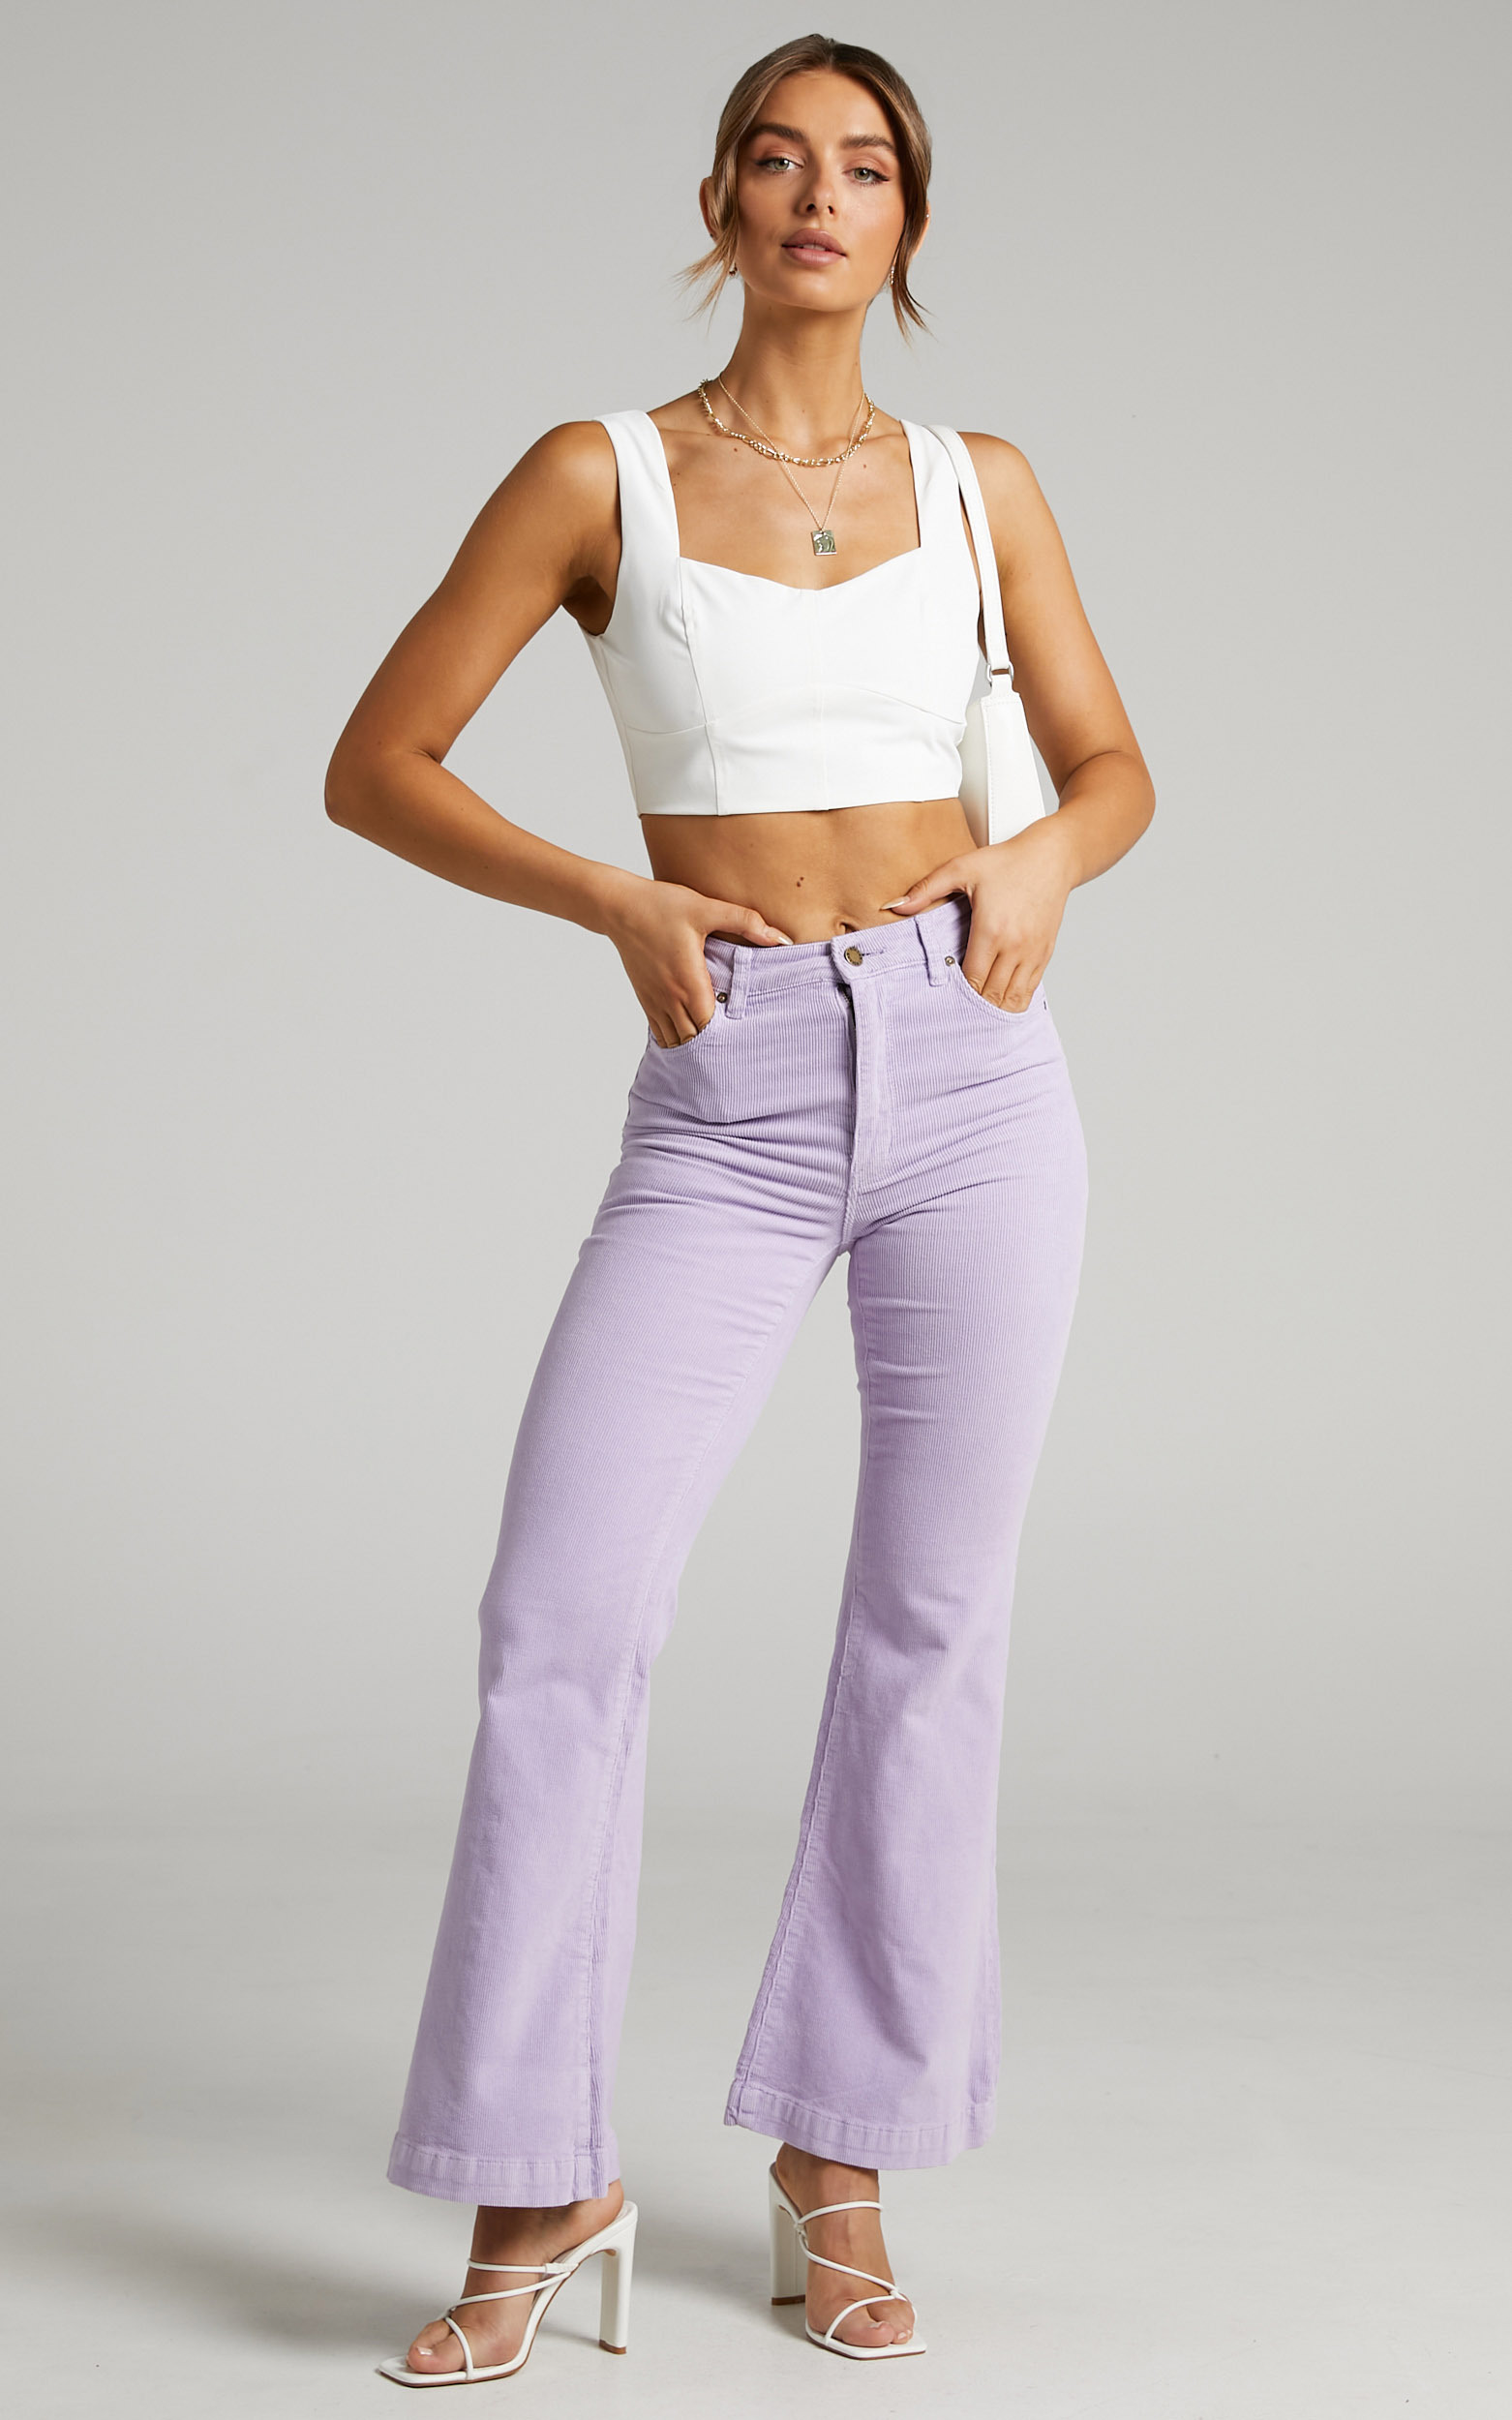 Rolla's - EASTCOAST FLARE in LAVENDER CORD - 06, PRP1, hi-res image number null